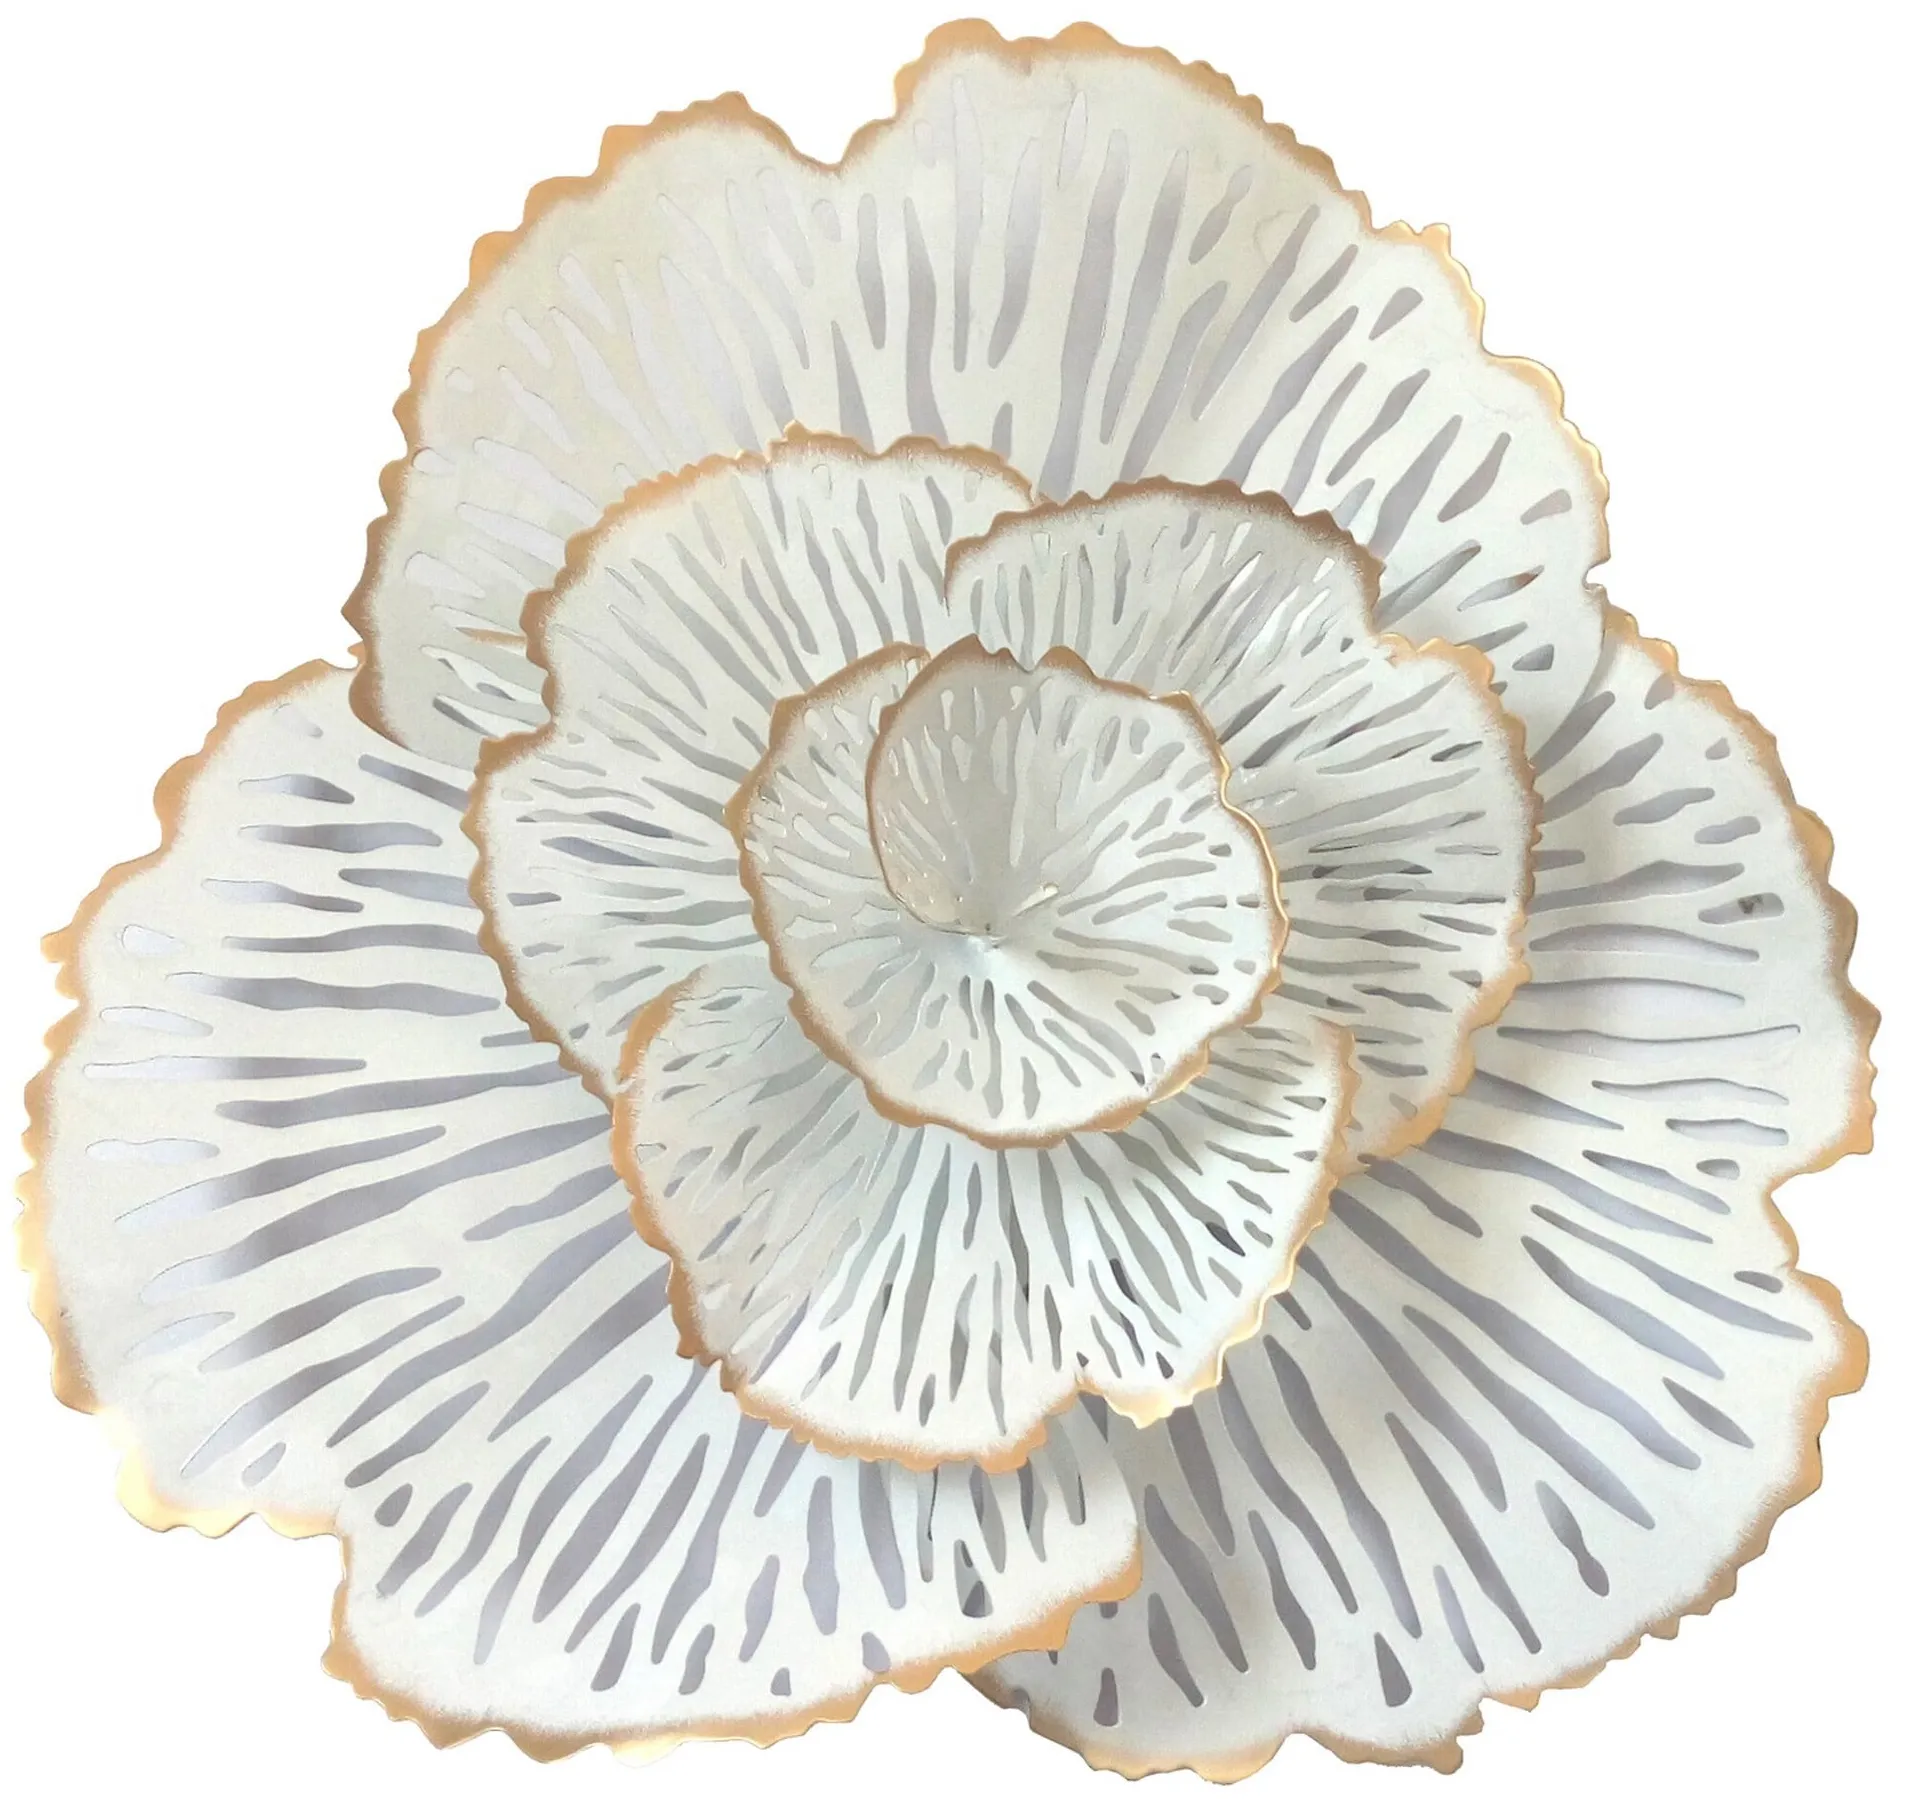 Small White and Gold Metal Flower Art 22"W x 21"H